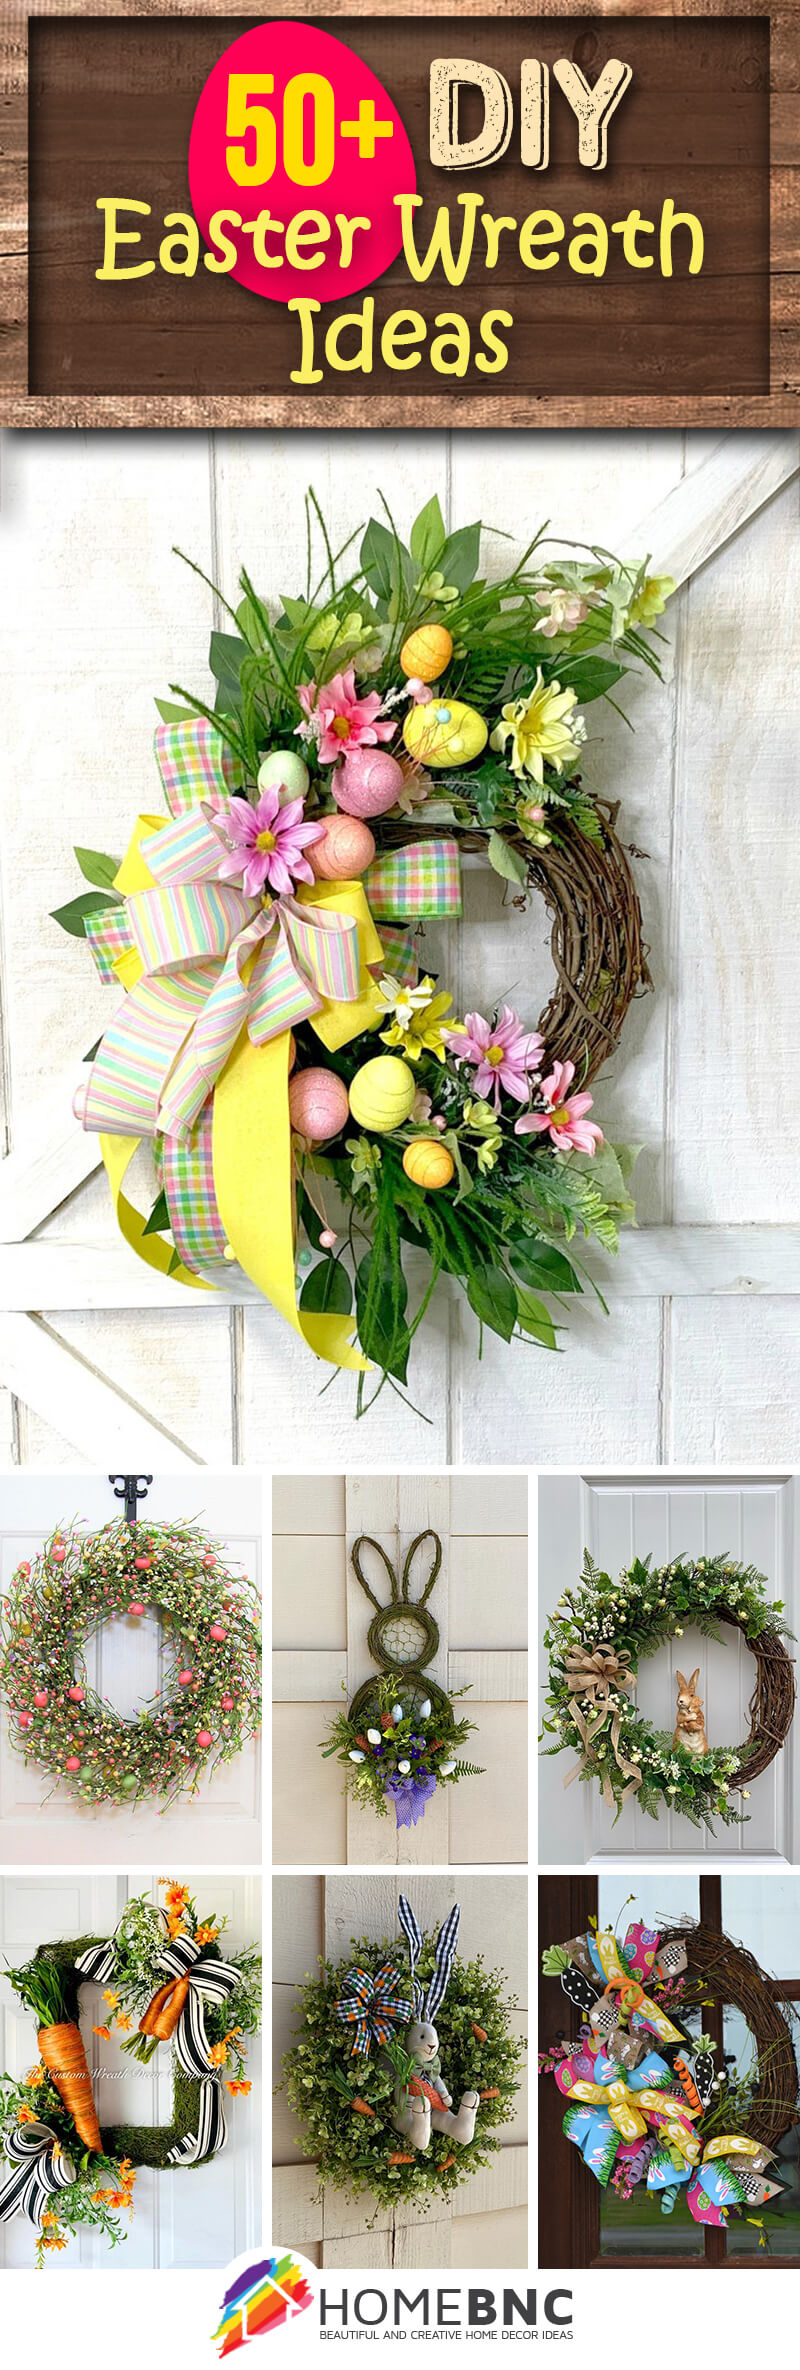 home decor Easter decoration Spring plaid bow for wreaths party decor